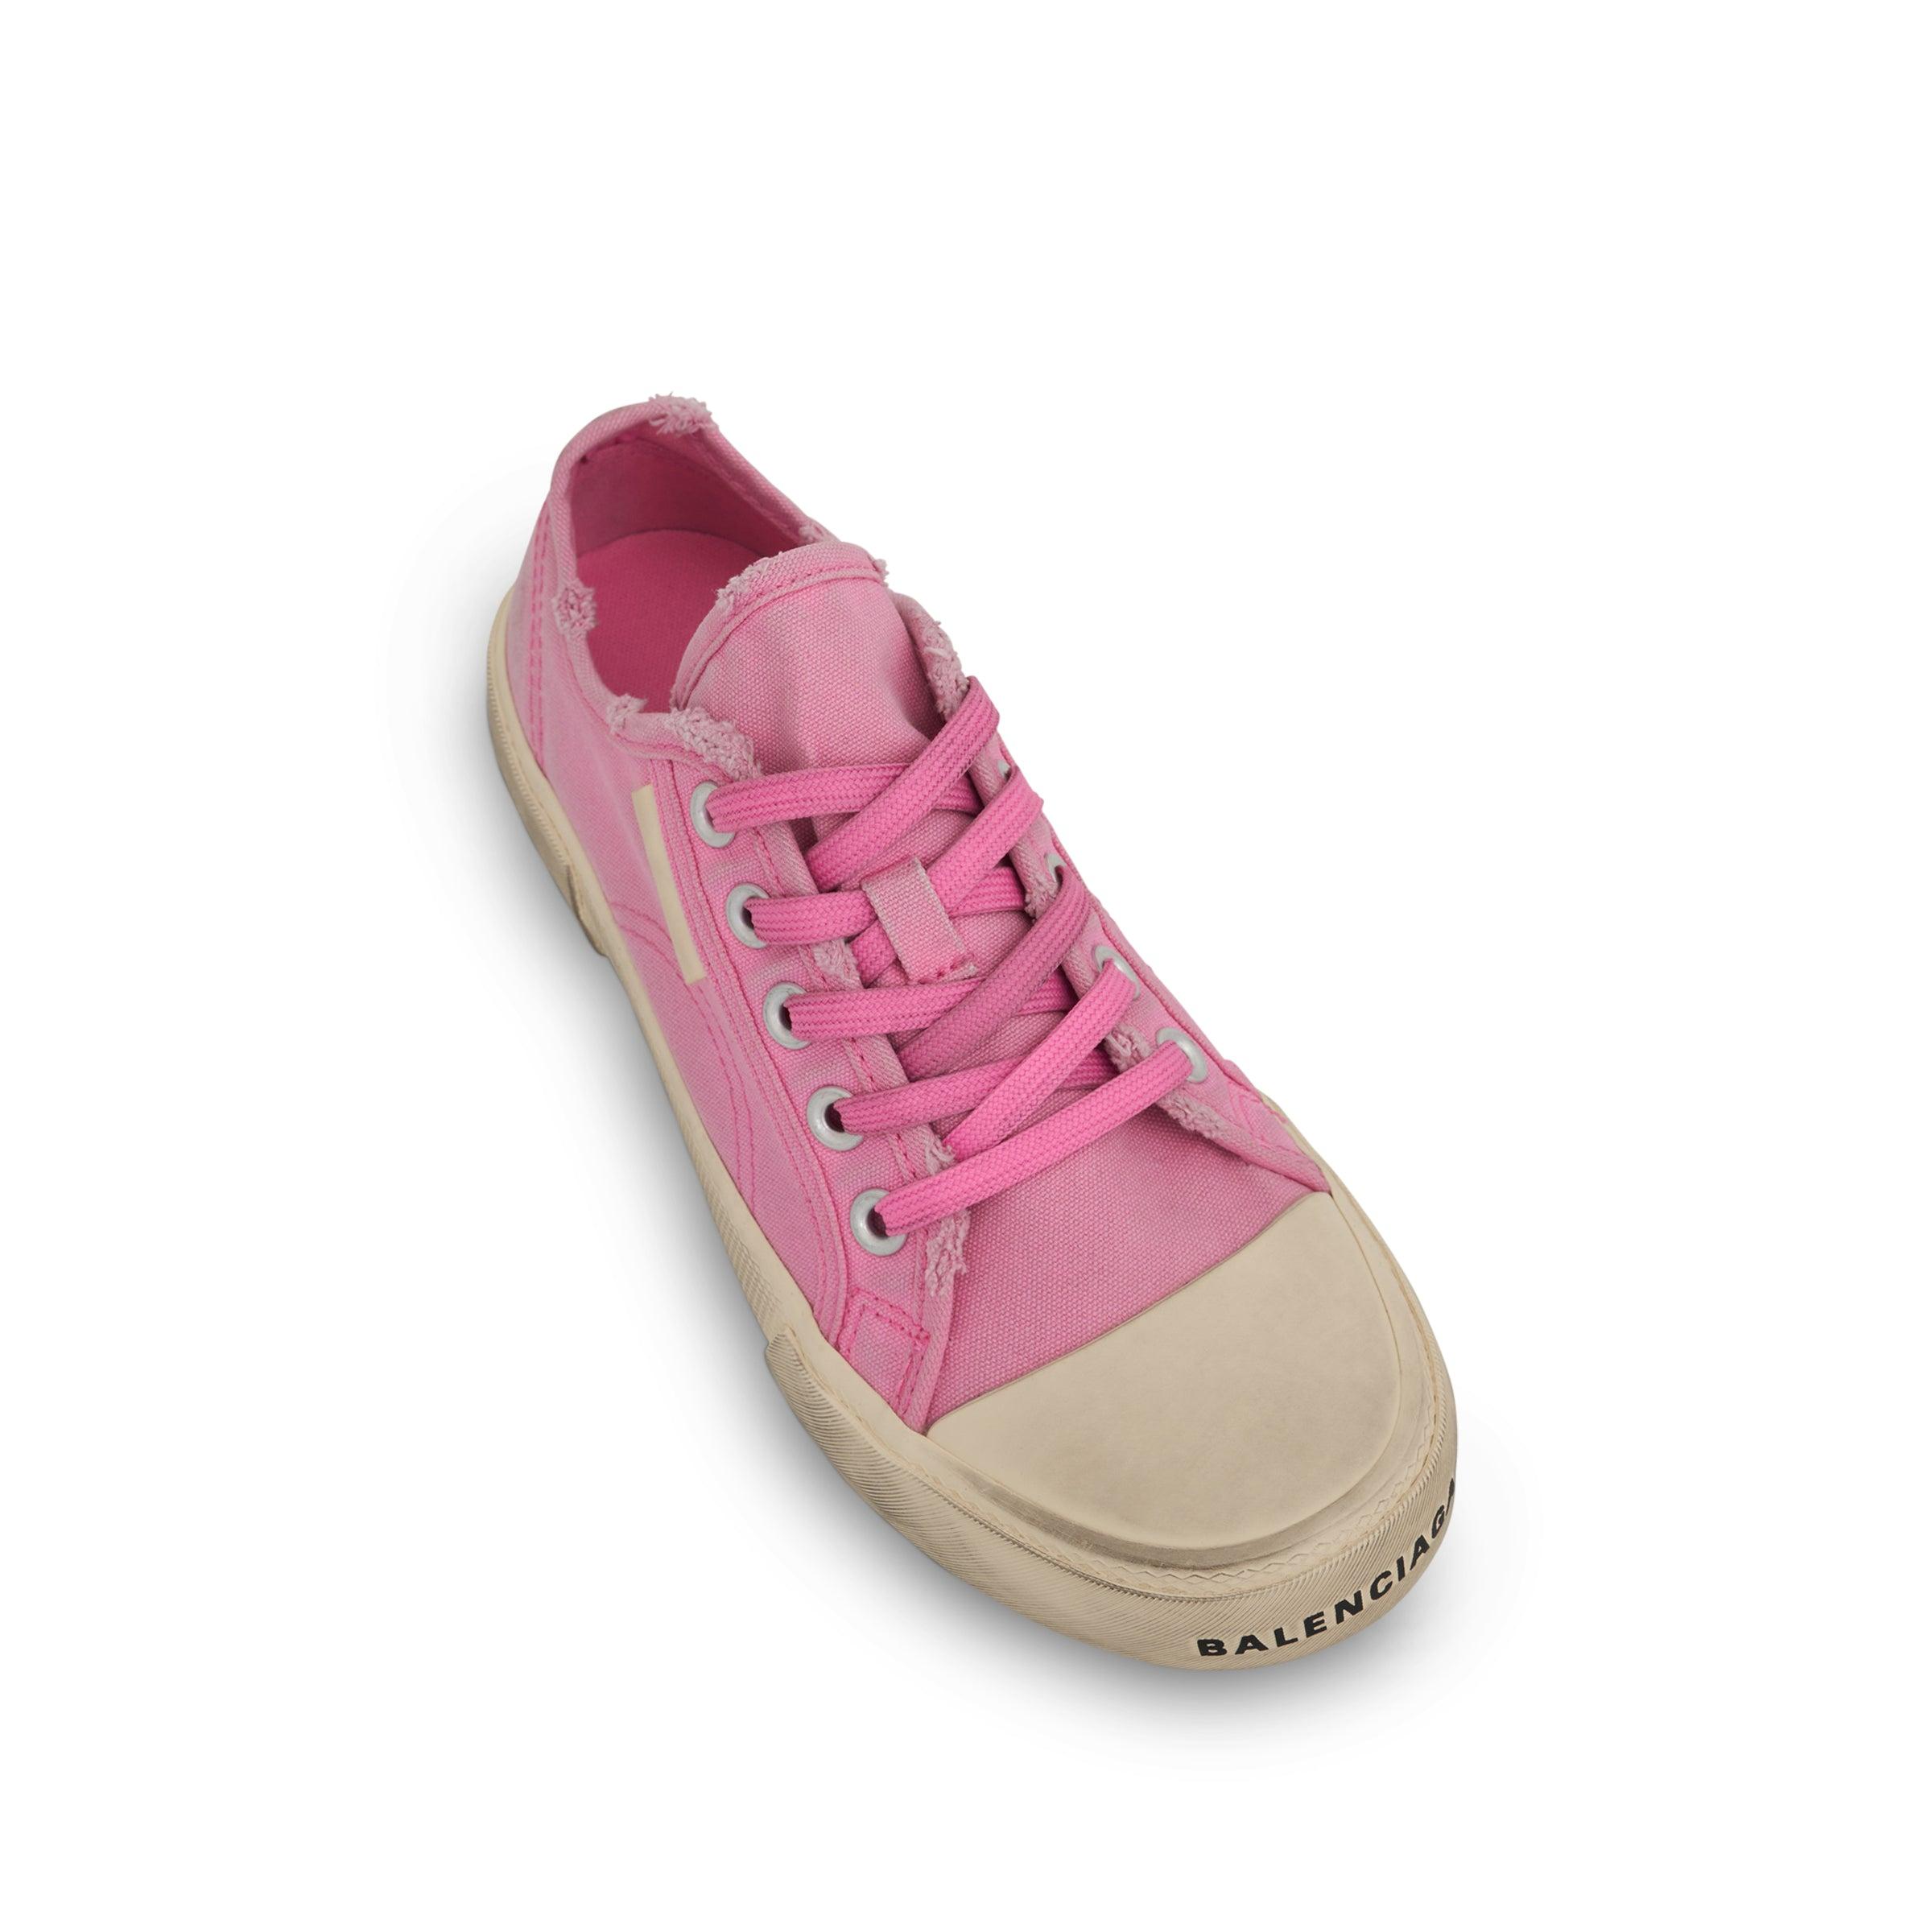 Balenciaga Paris Low Top Sneakers In Pink/white | Lyst